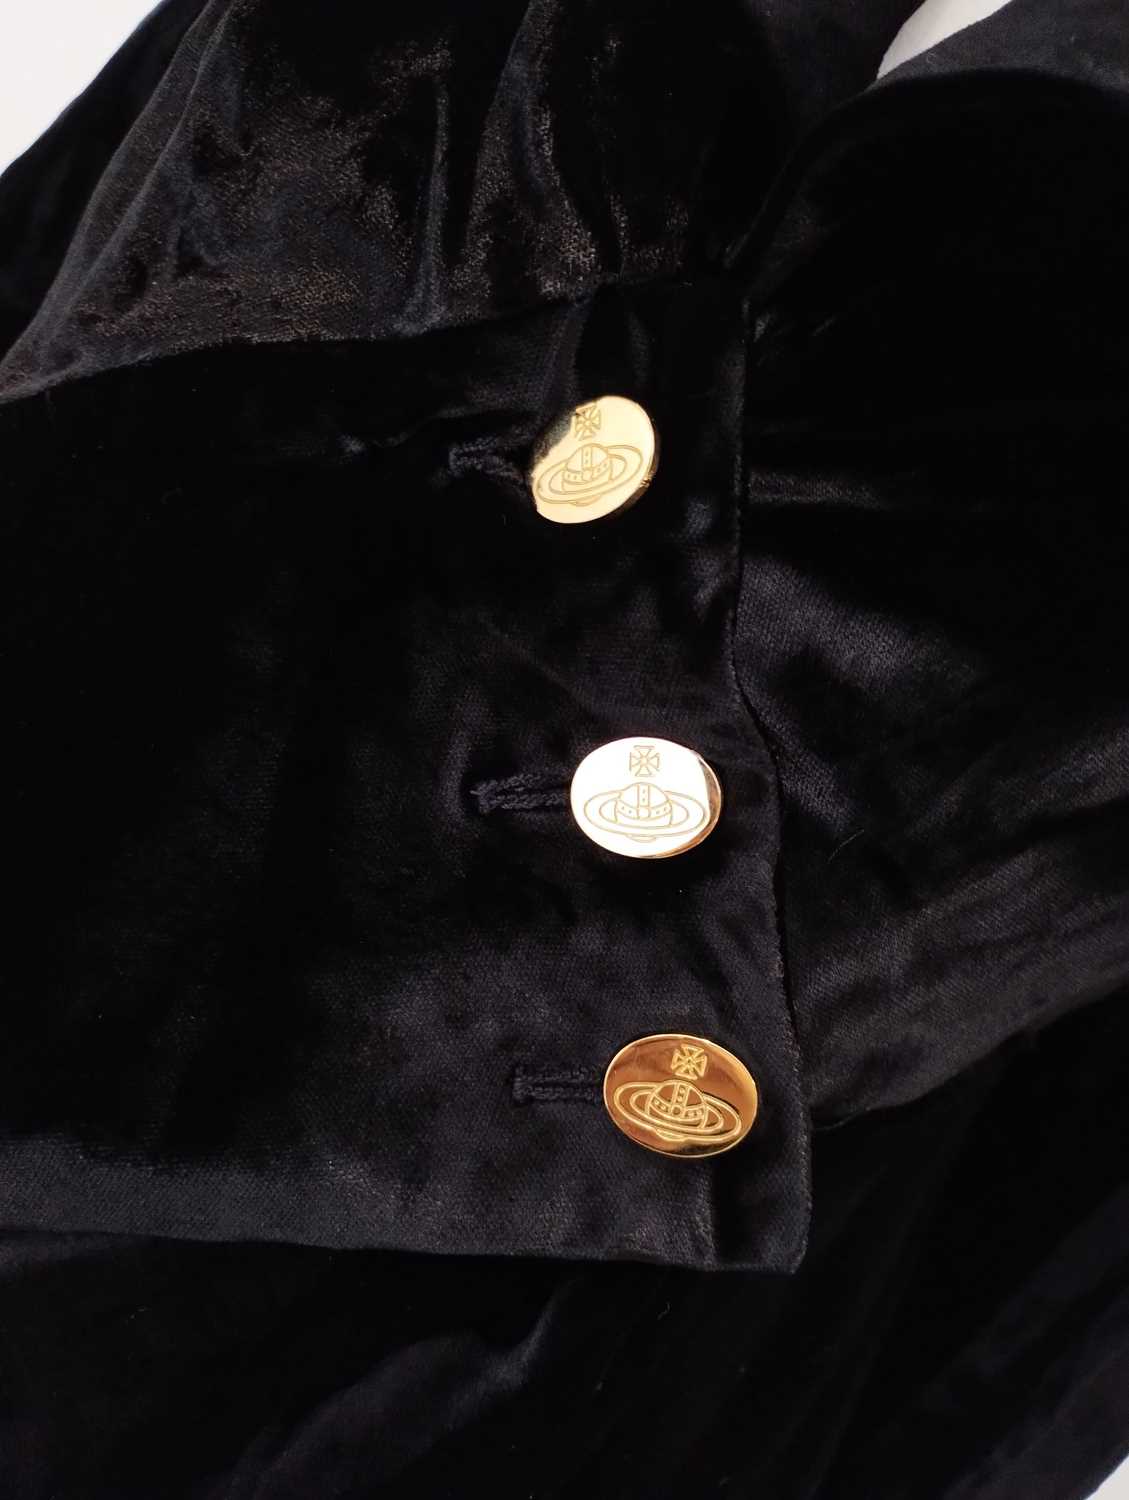 Vivienne Westwood London Black Pan Velvet Jacket, Spring/Summer Café Society Collection 1994 with - Image 4 of 27